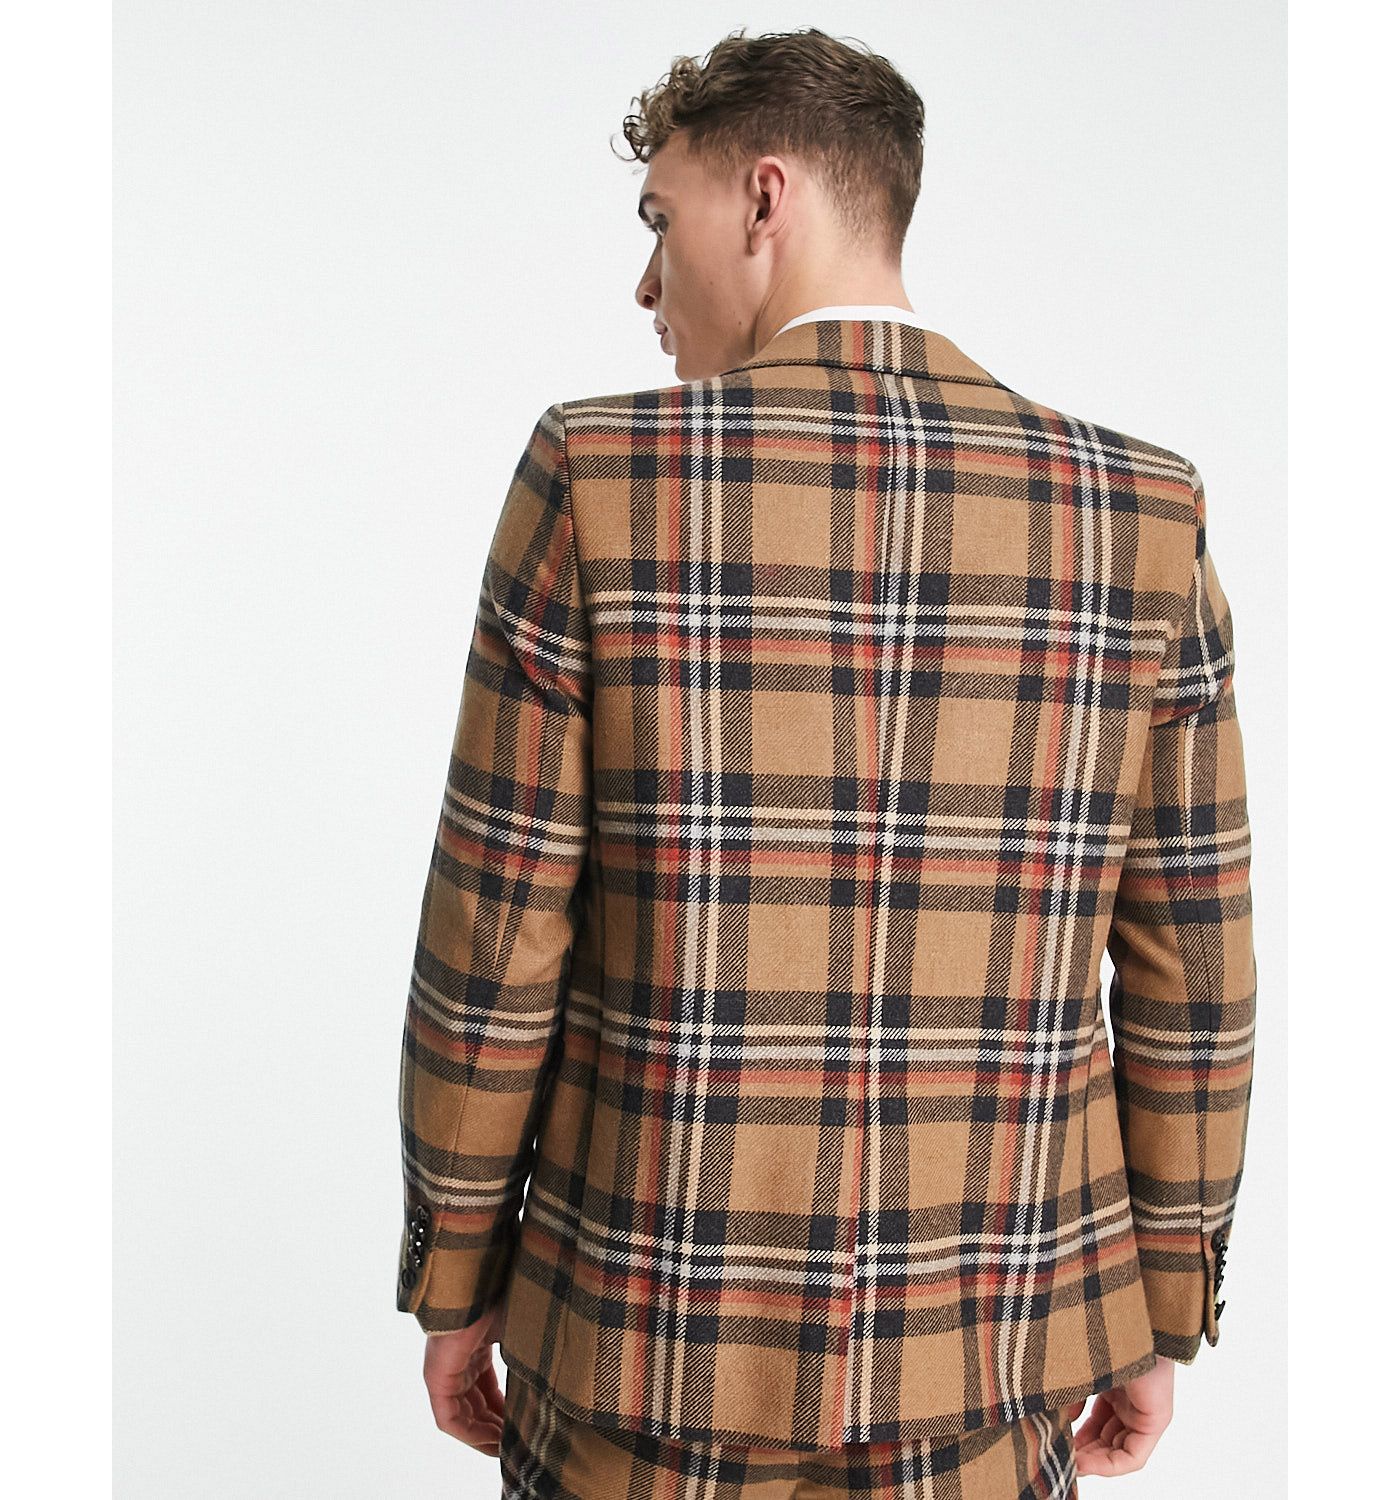 Twisted Tailor nevada skinny suit jacket in beige and blue tartan check